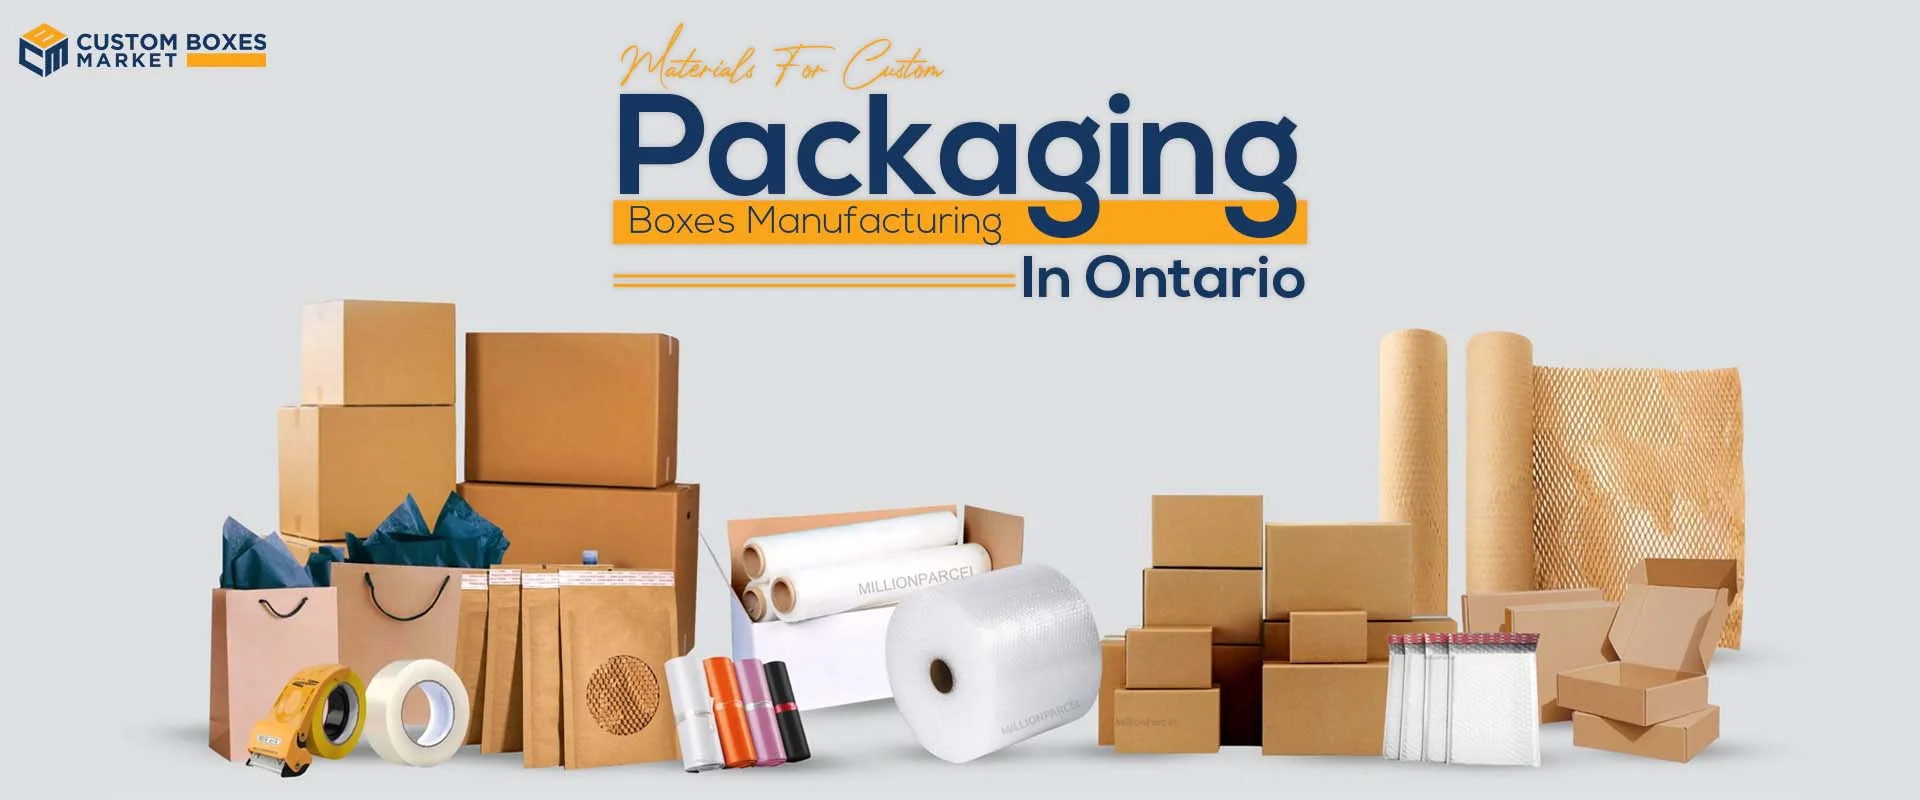 Materials For Custom Packaging Boxes Manufacturing In Ontario